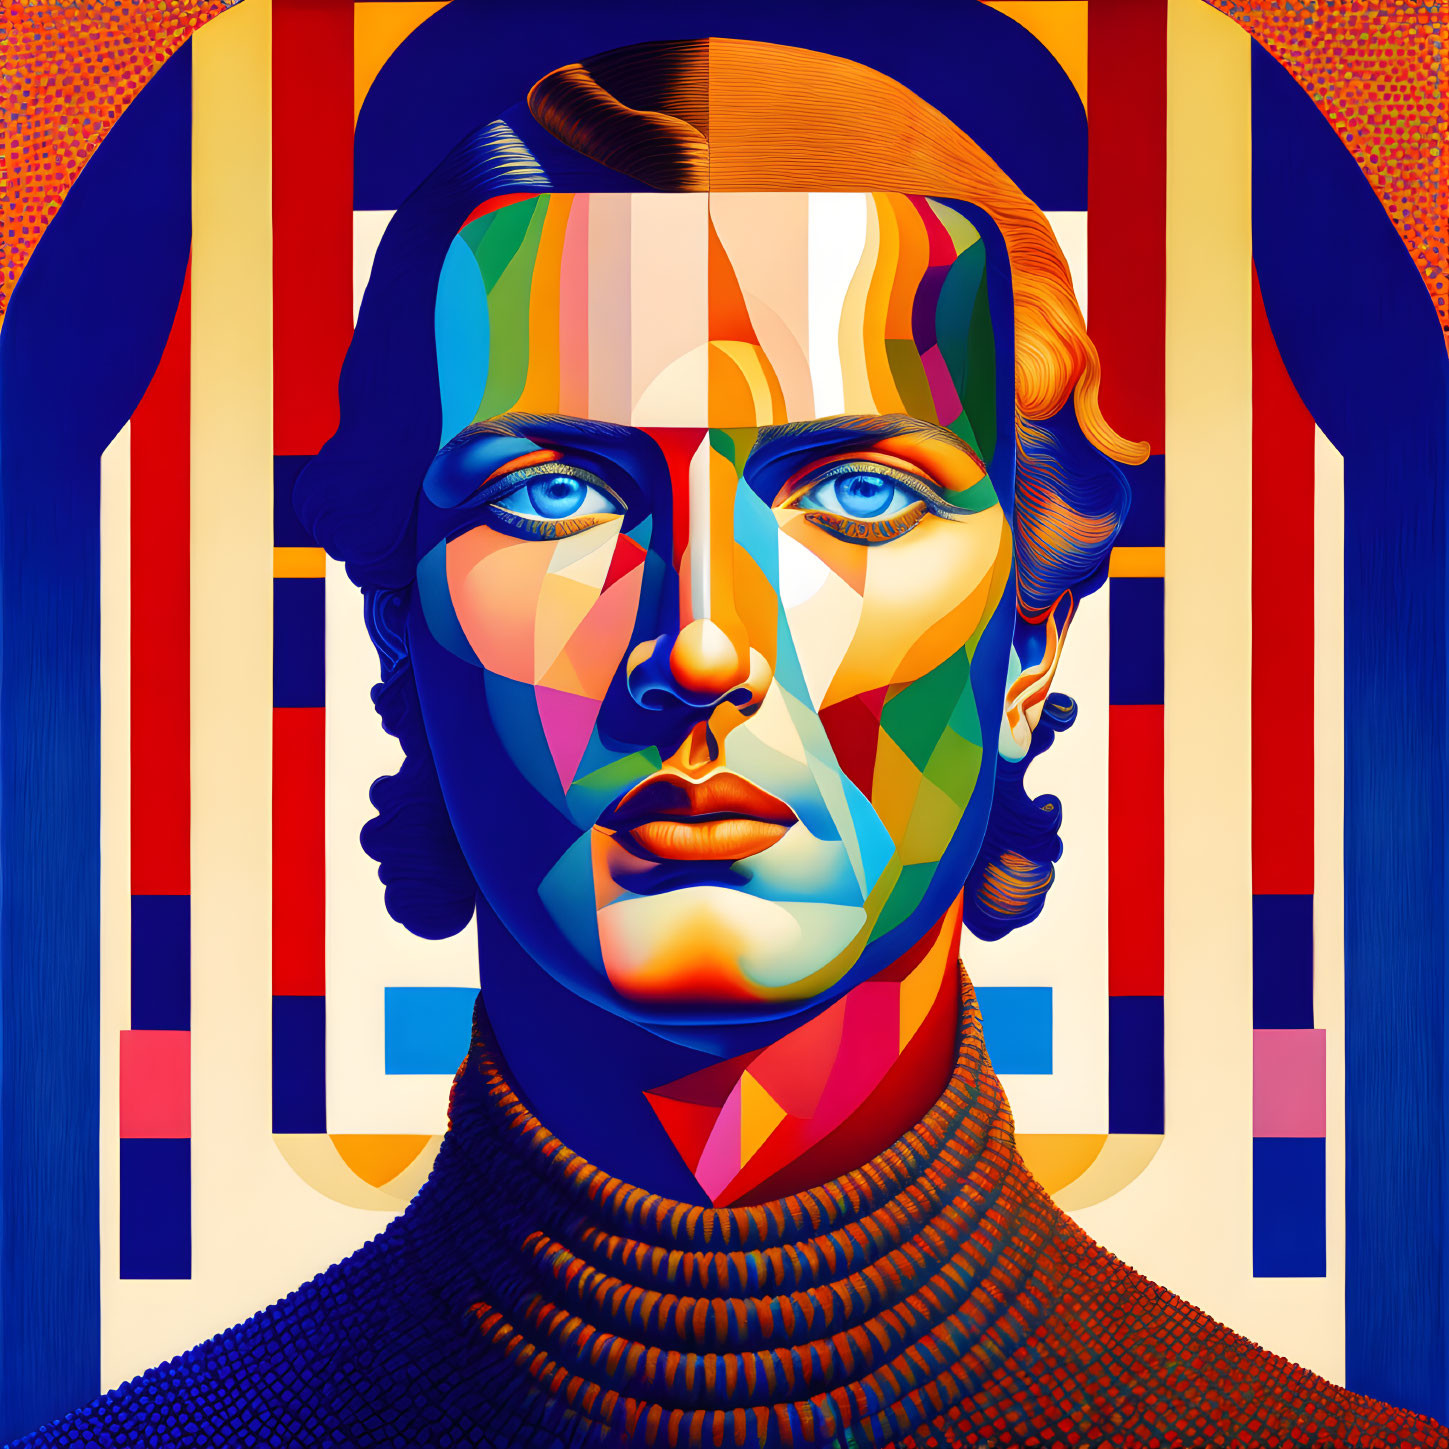 Colorful Geometric Portrait Featuring Blue-Eyed Person on Patterned Background